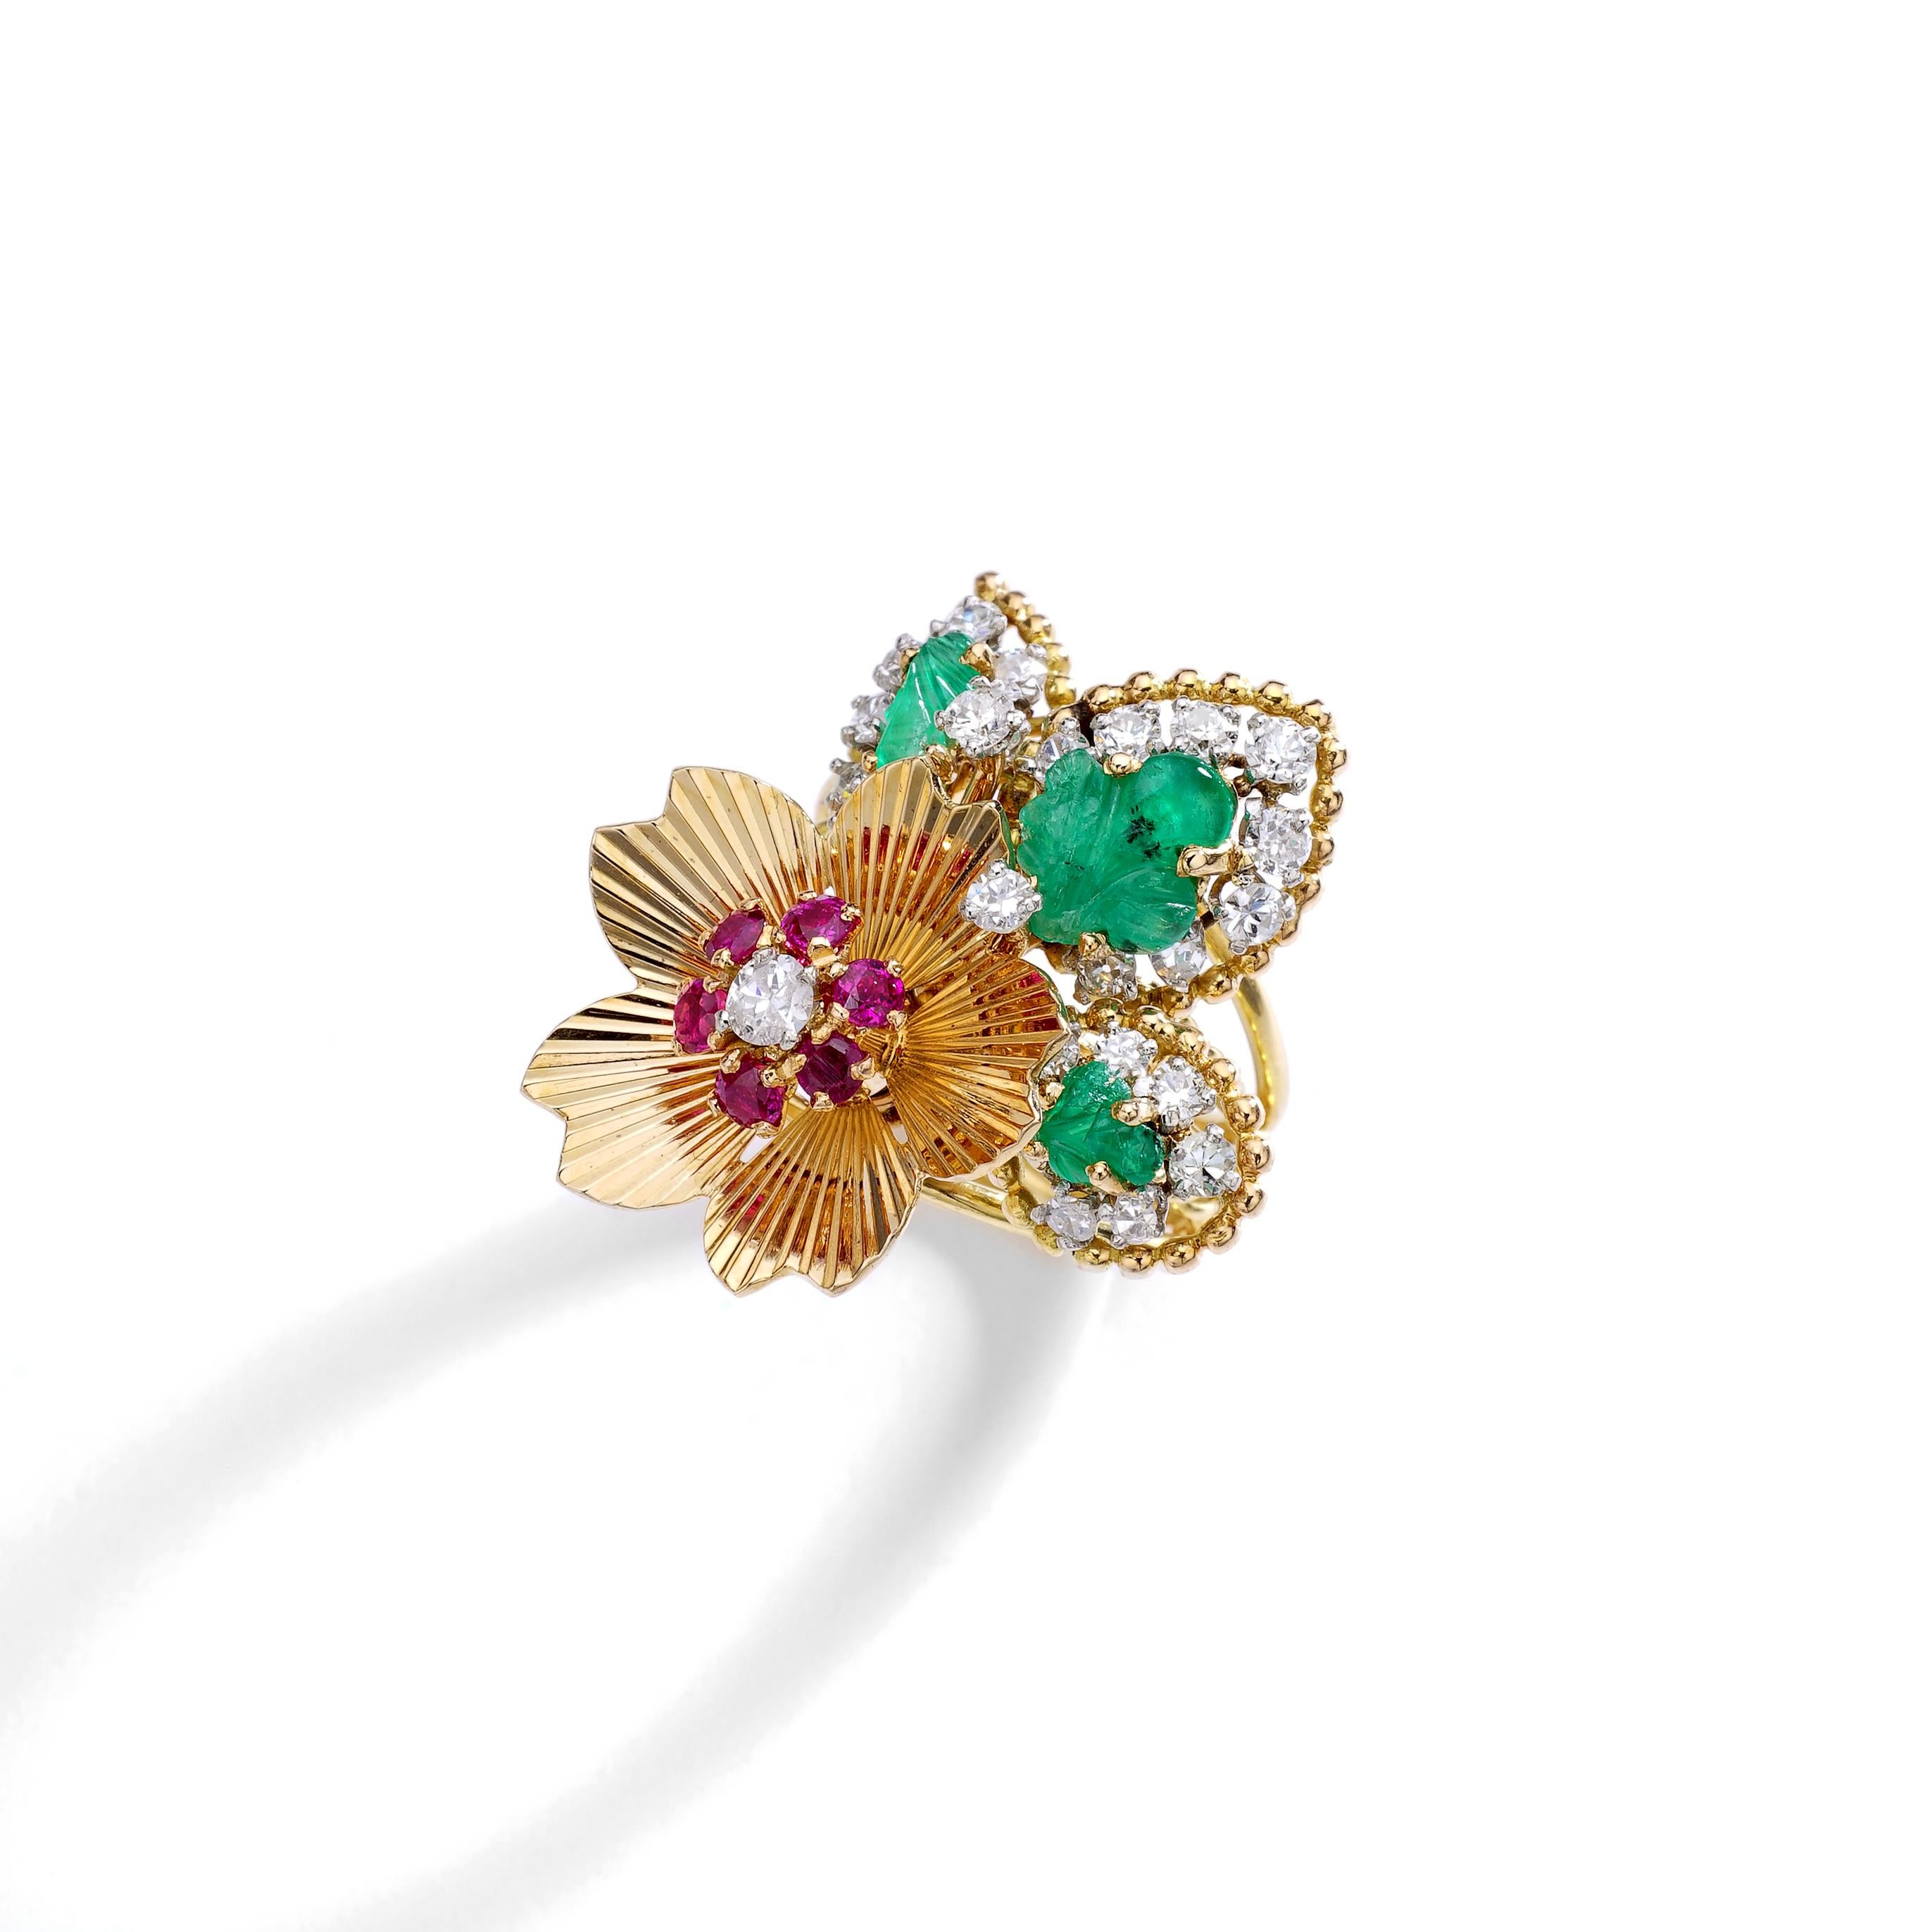 Lovely ring in yellow gold 18k and platinum with Diamond, Ruby and carved Emerald.
Circa 1950.
Ring size: 5 1/2 US.

Length on the finger top part: 0.99 inch (2.50 centimeters) approximately.
